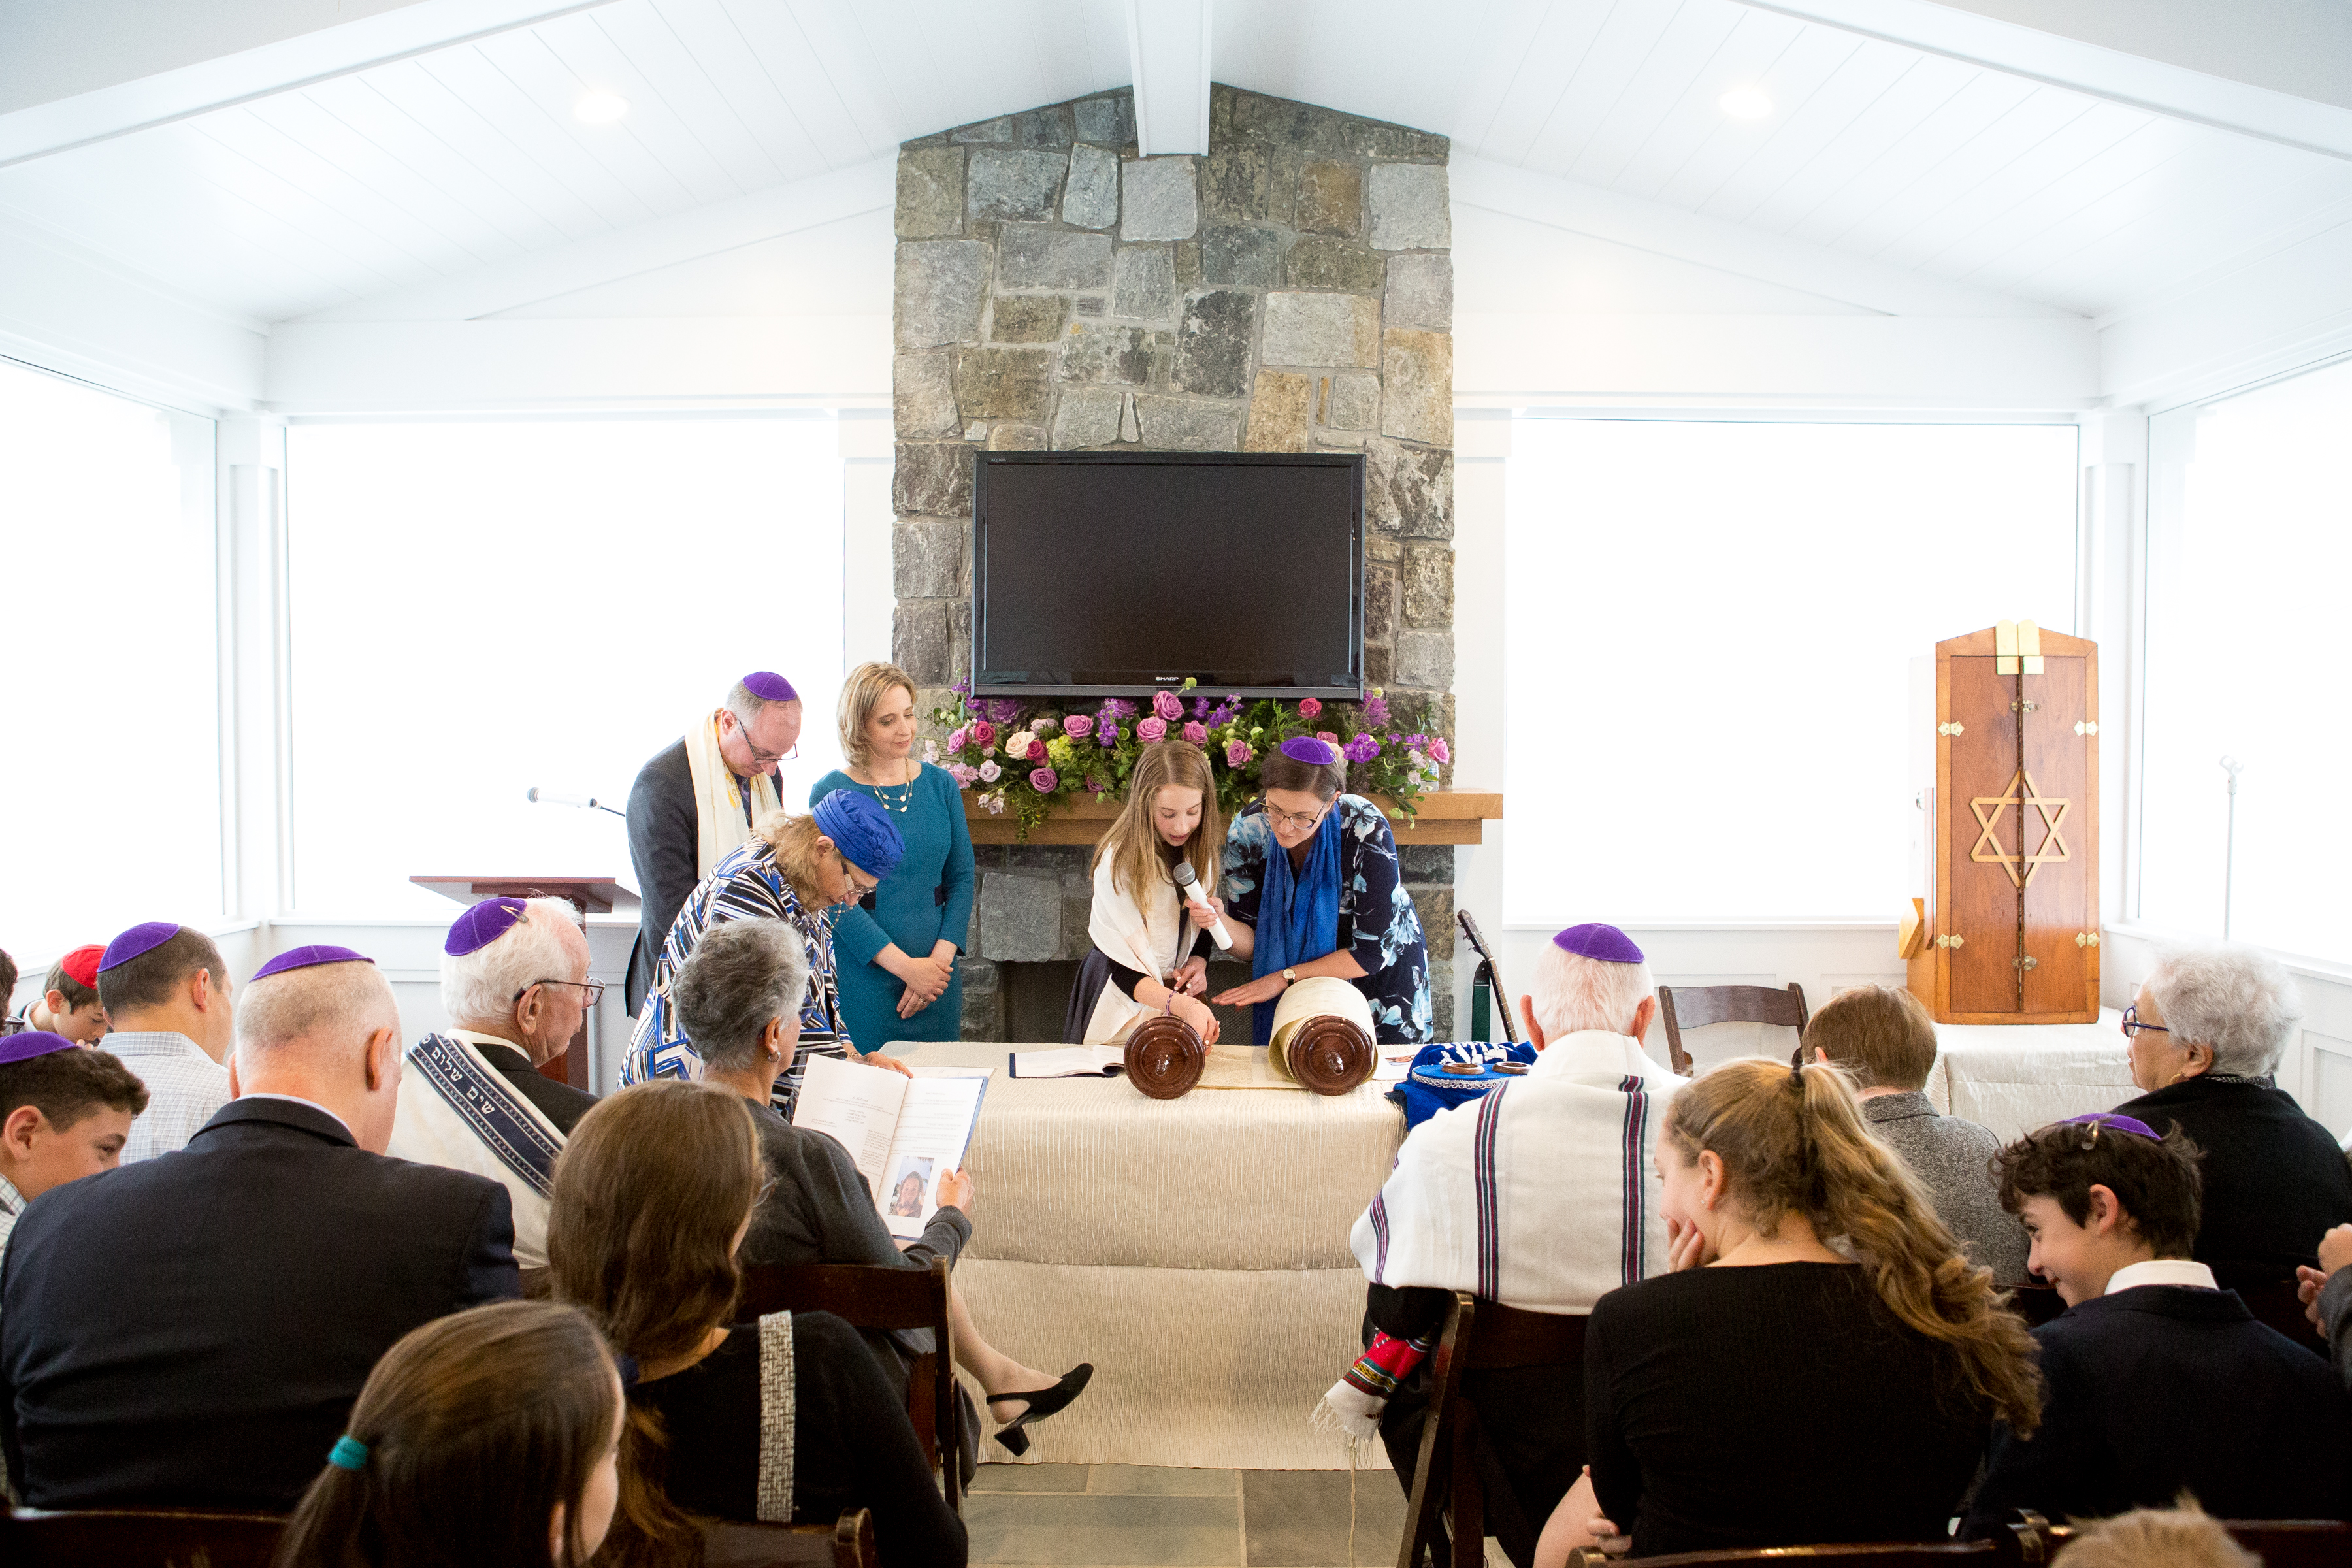 Maddie's Bat Mitzvah service in her Bethesda home | Pop Color Events | Adding a Pop of Color to Bar & Bat Mitzvahs in DC, MD, and VA | Photo by Jessica Latos Photography